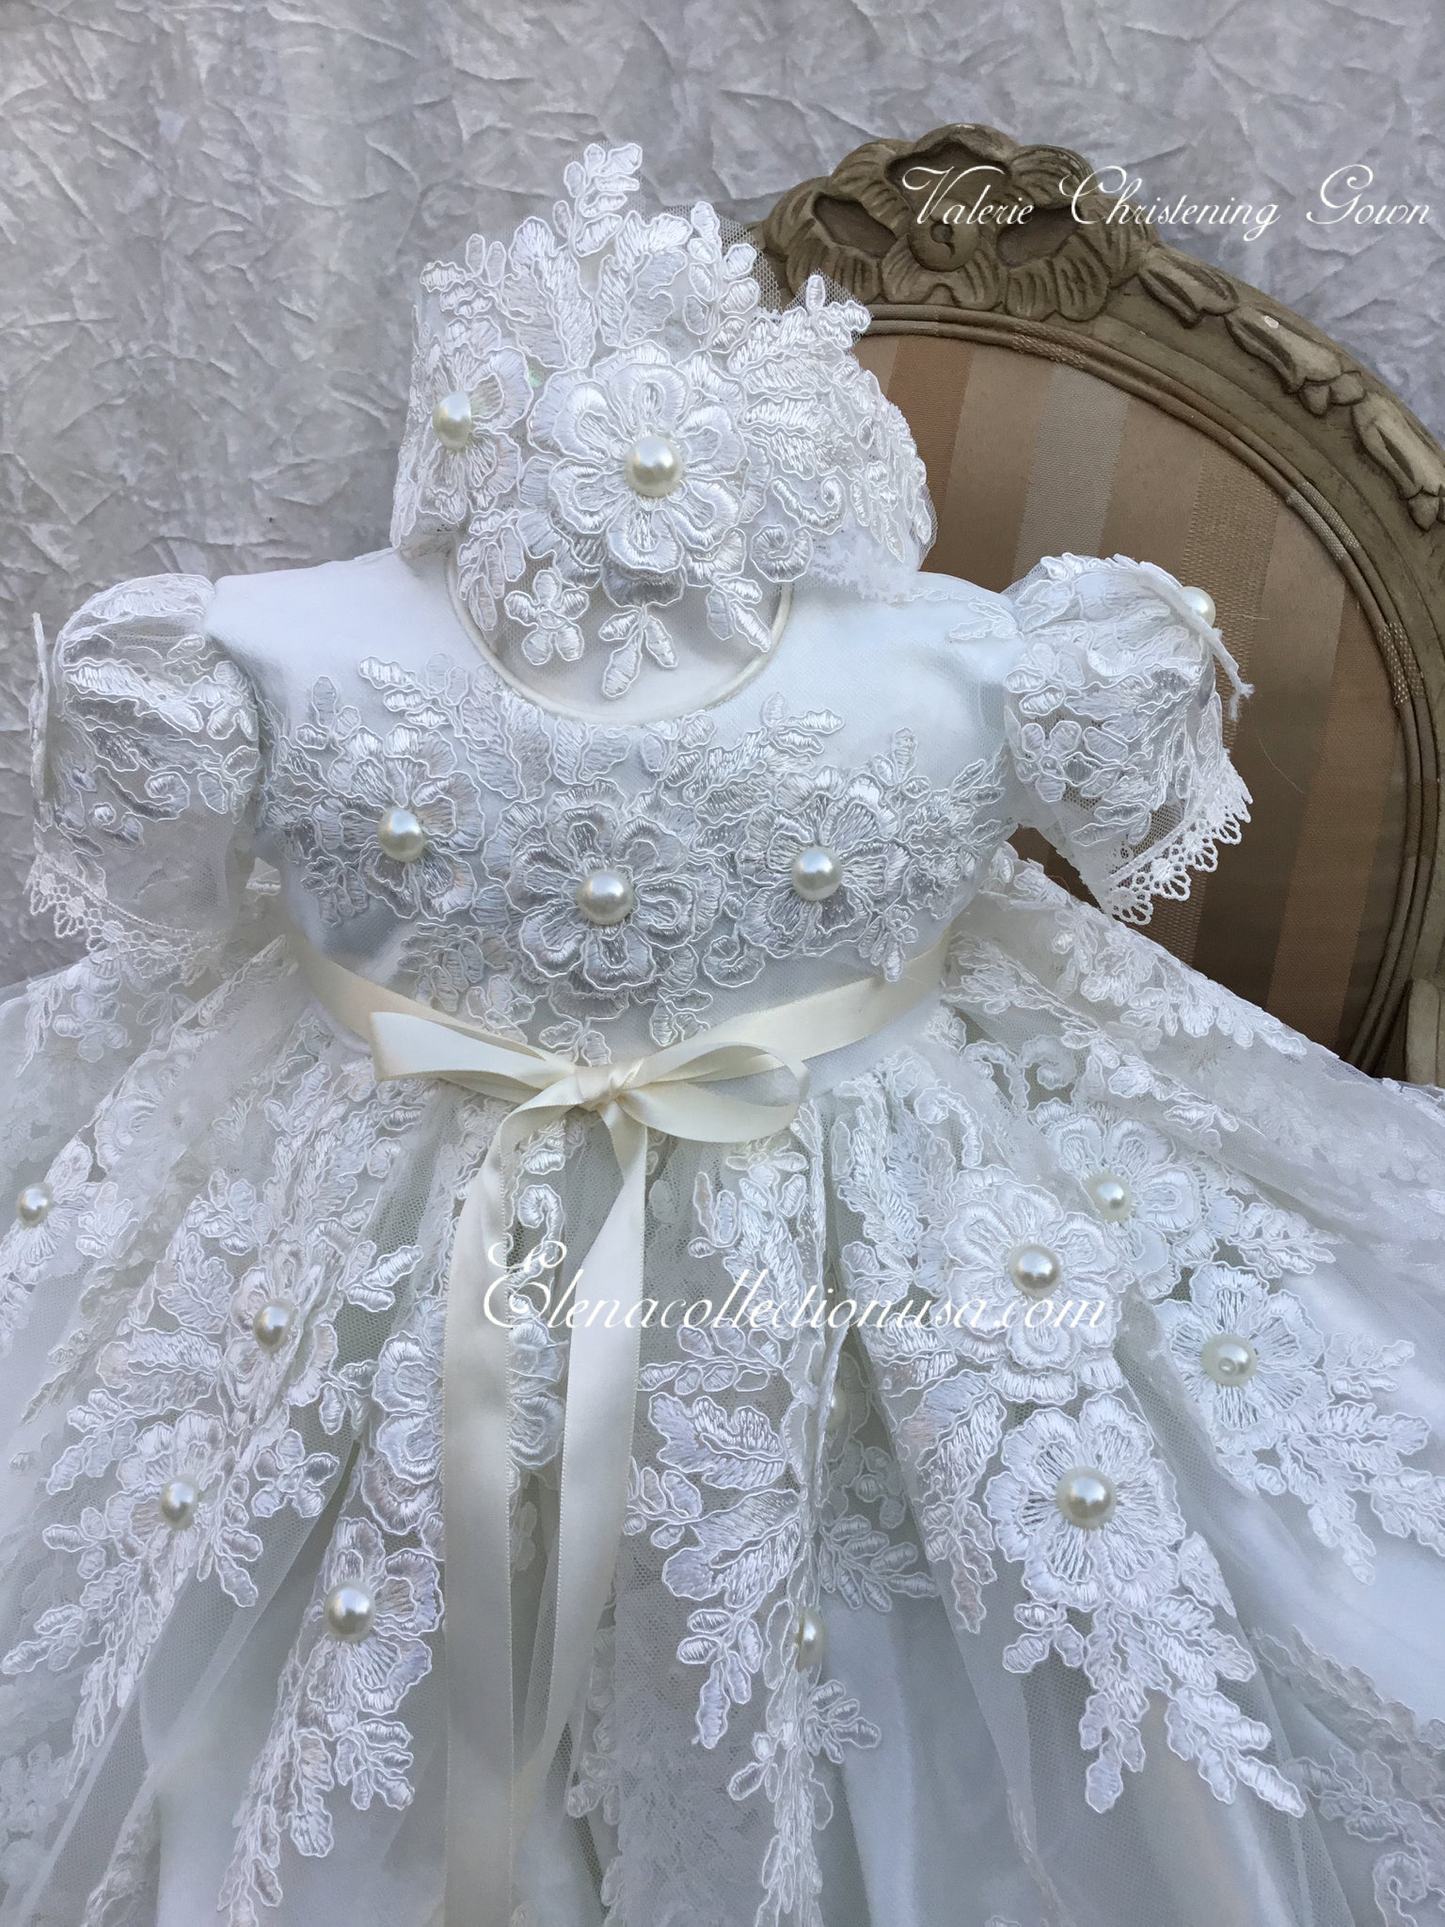 Christening Gown with Bonnet - Valerie